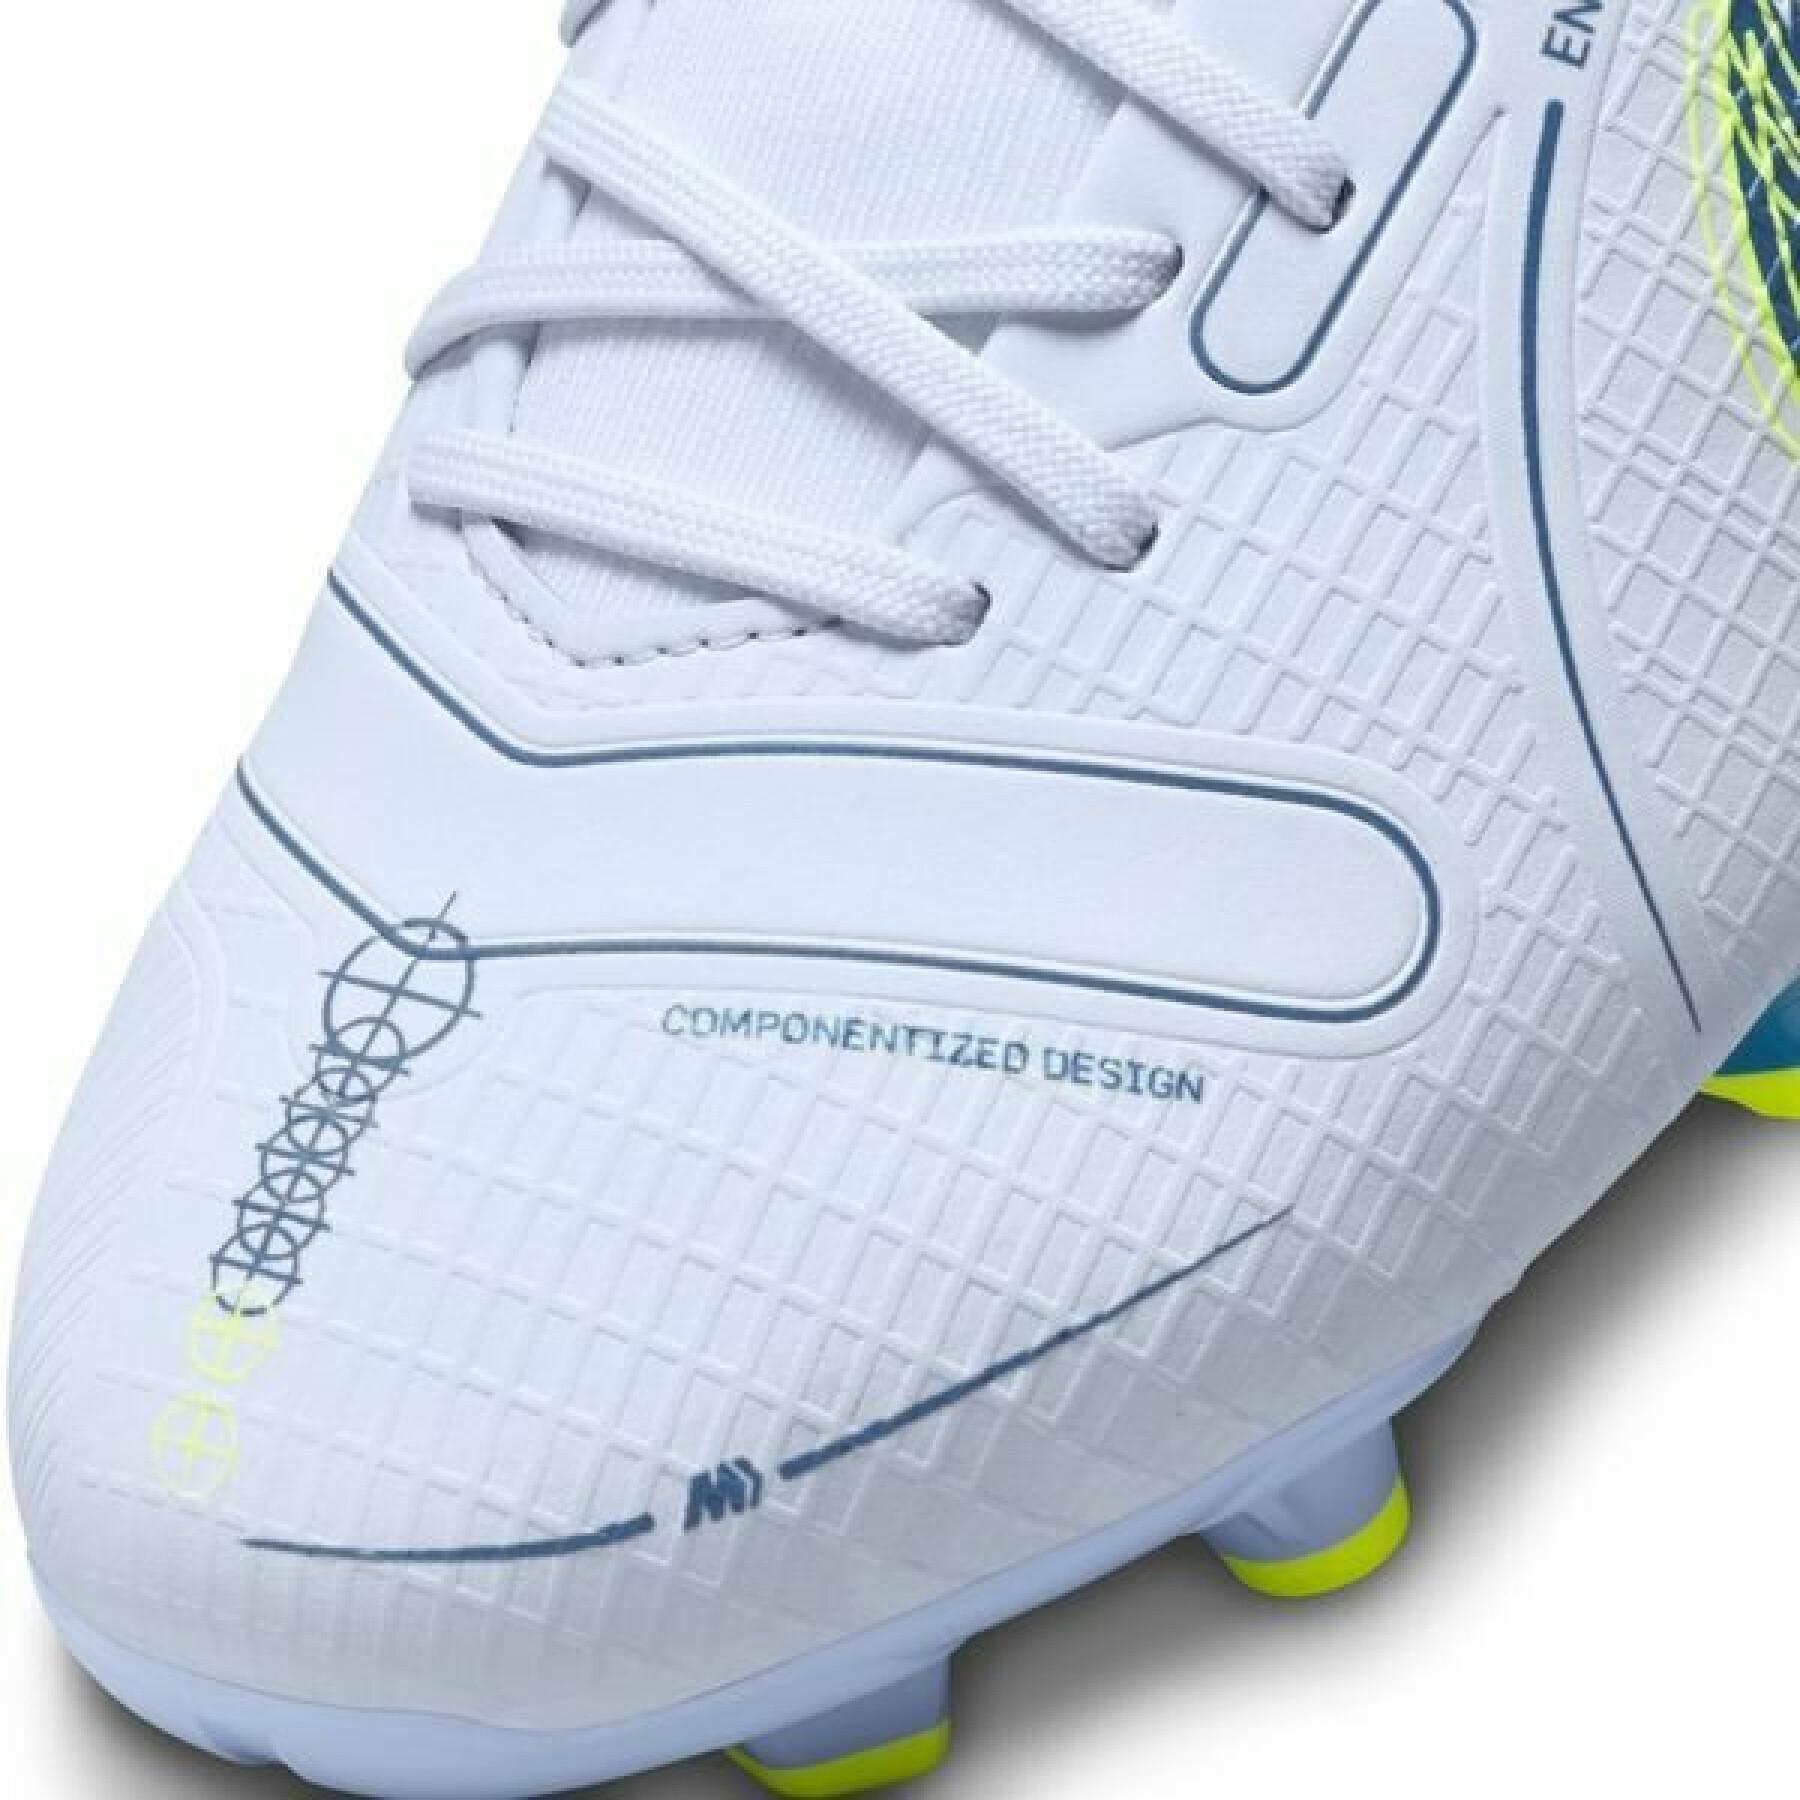 Children's soccer shoes Nike Jr. Mercurial Superfly 8 Academy MG